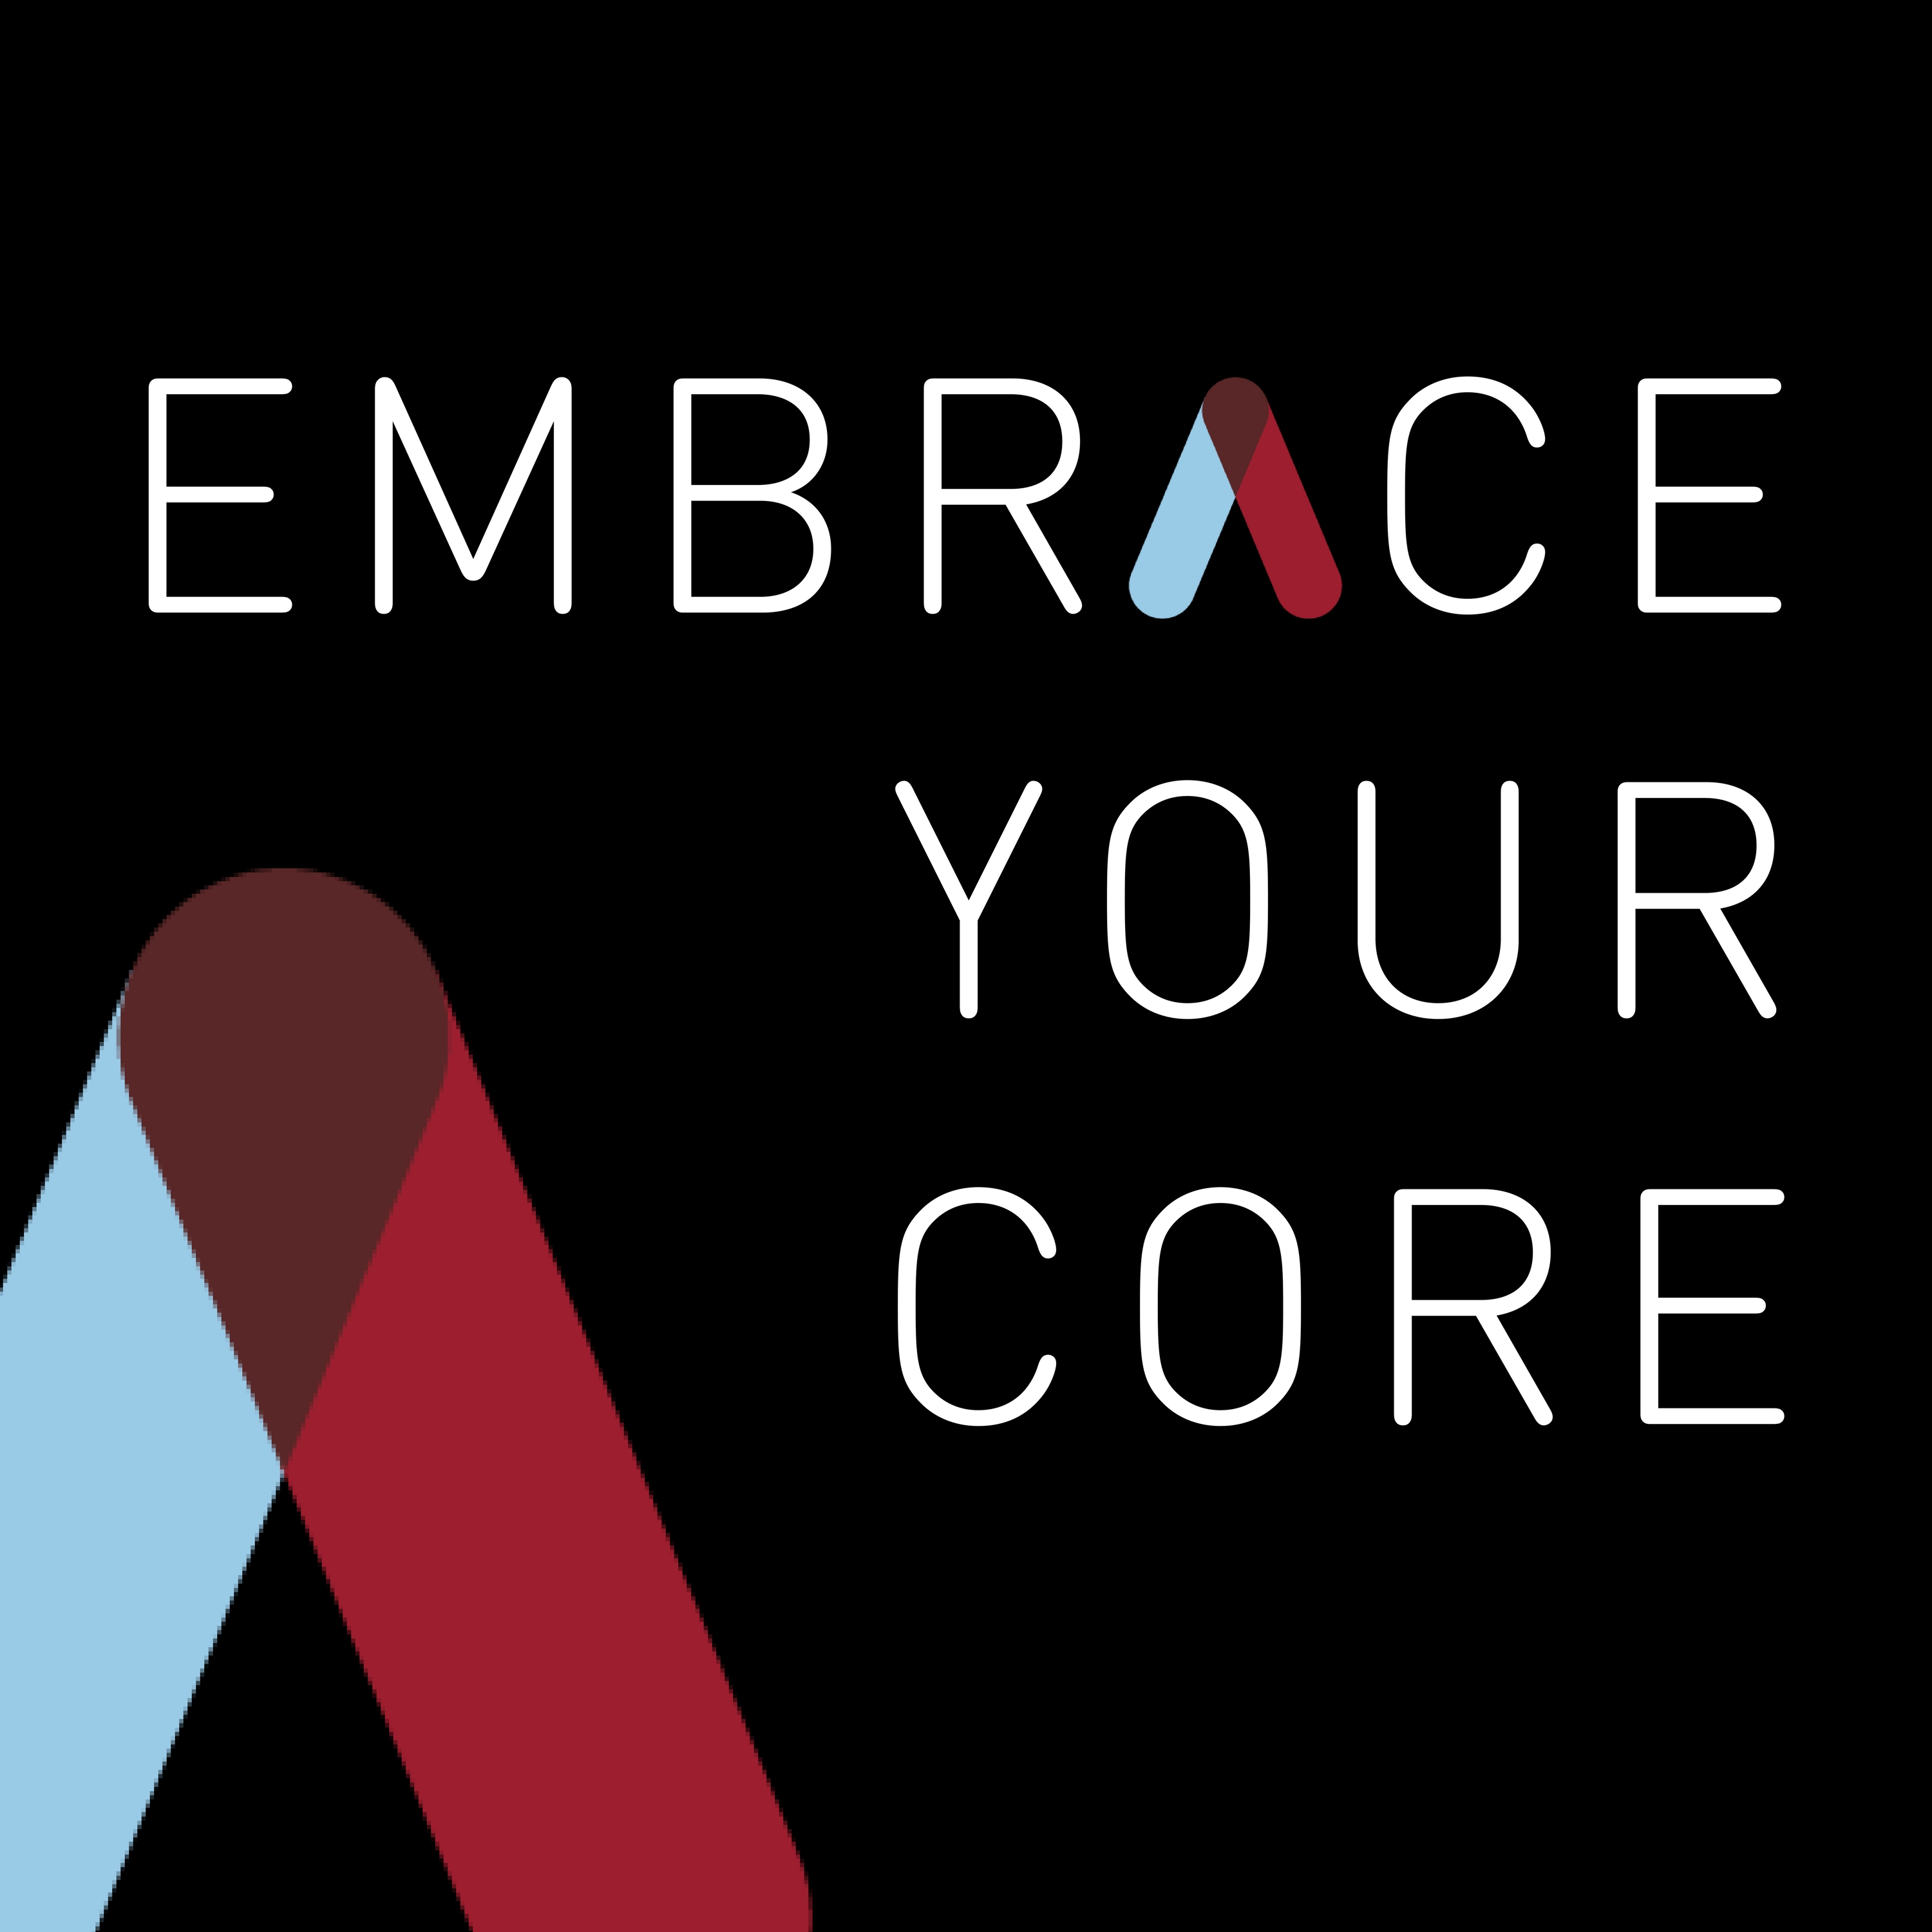 Embrace Your Core text in a black box with SPEAR logo